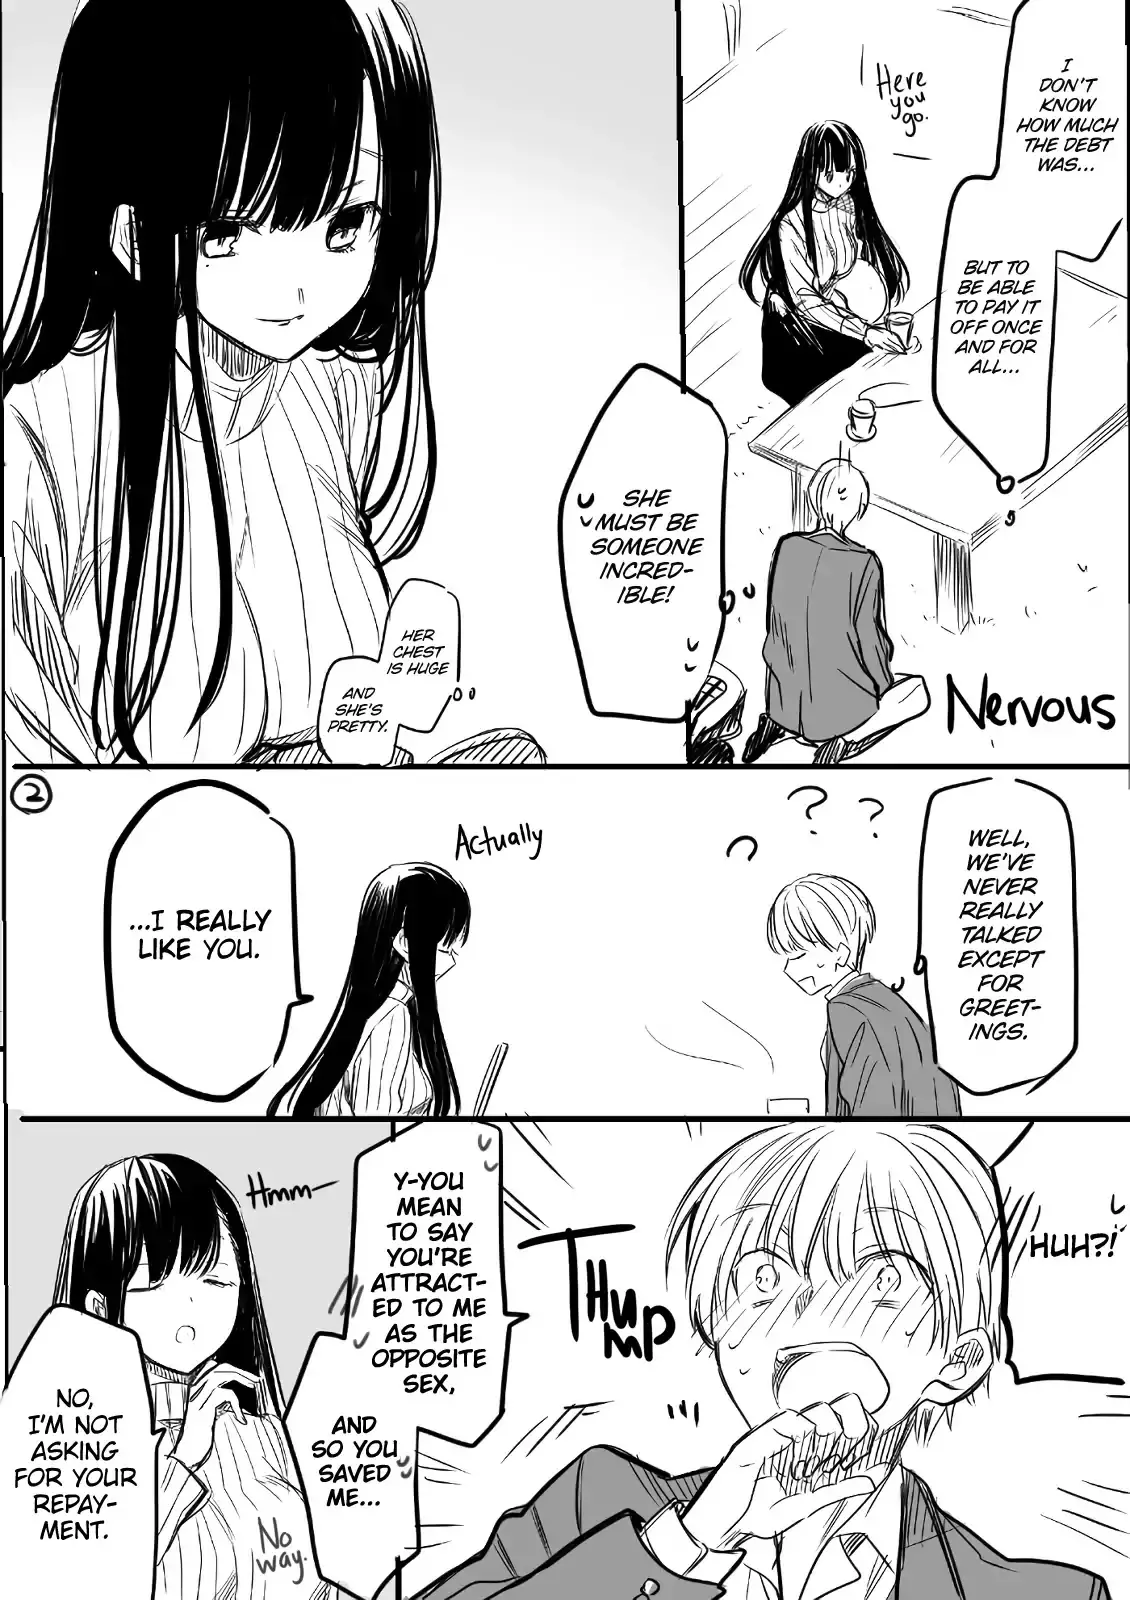 The Story Of An Onee-San Who Wants To Keep A High School Boy - 1 page 2